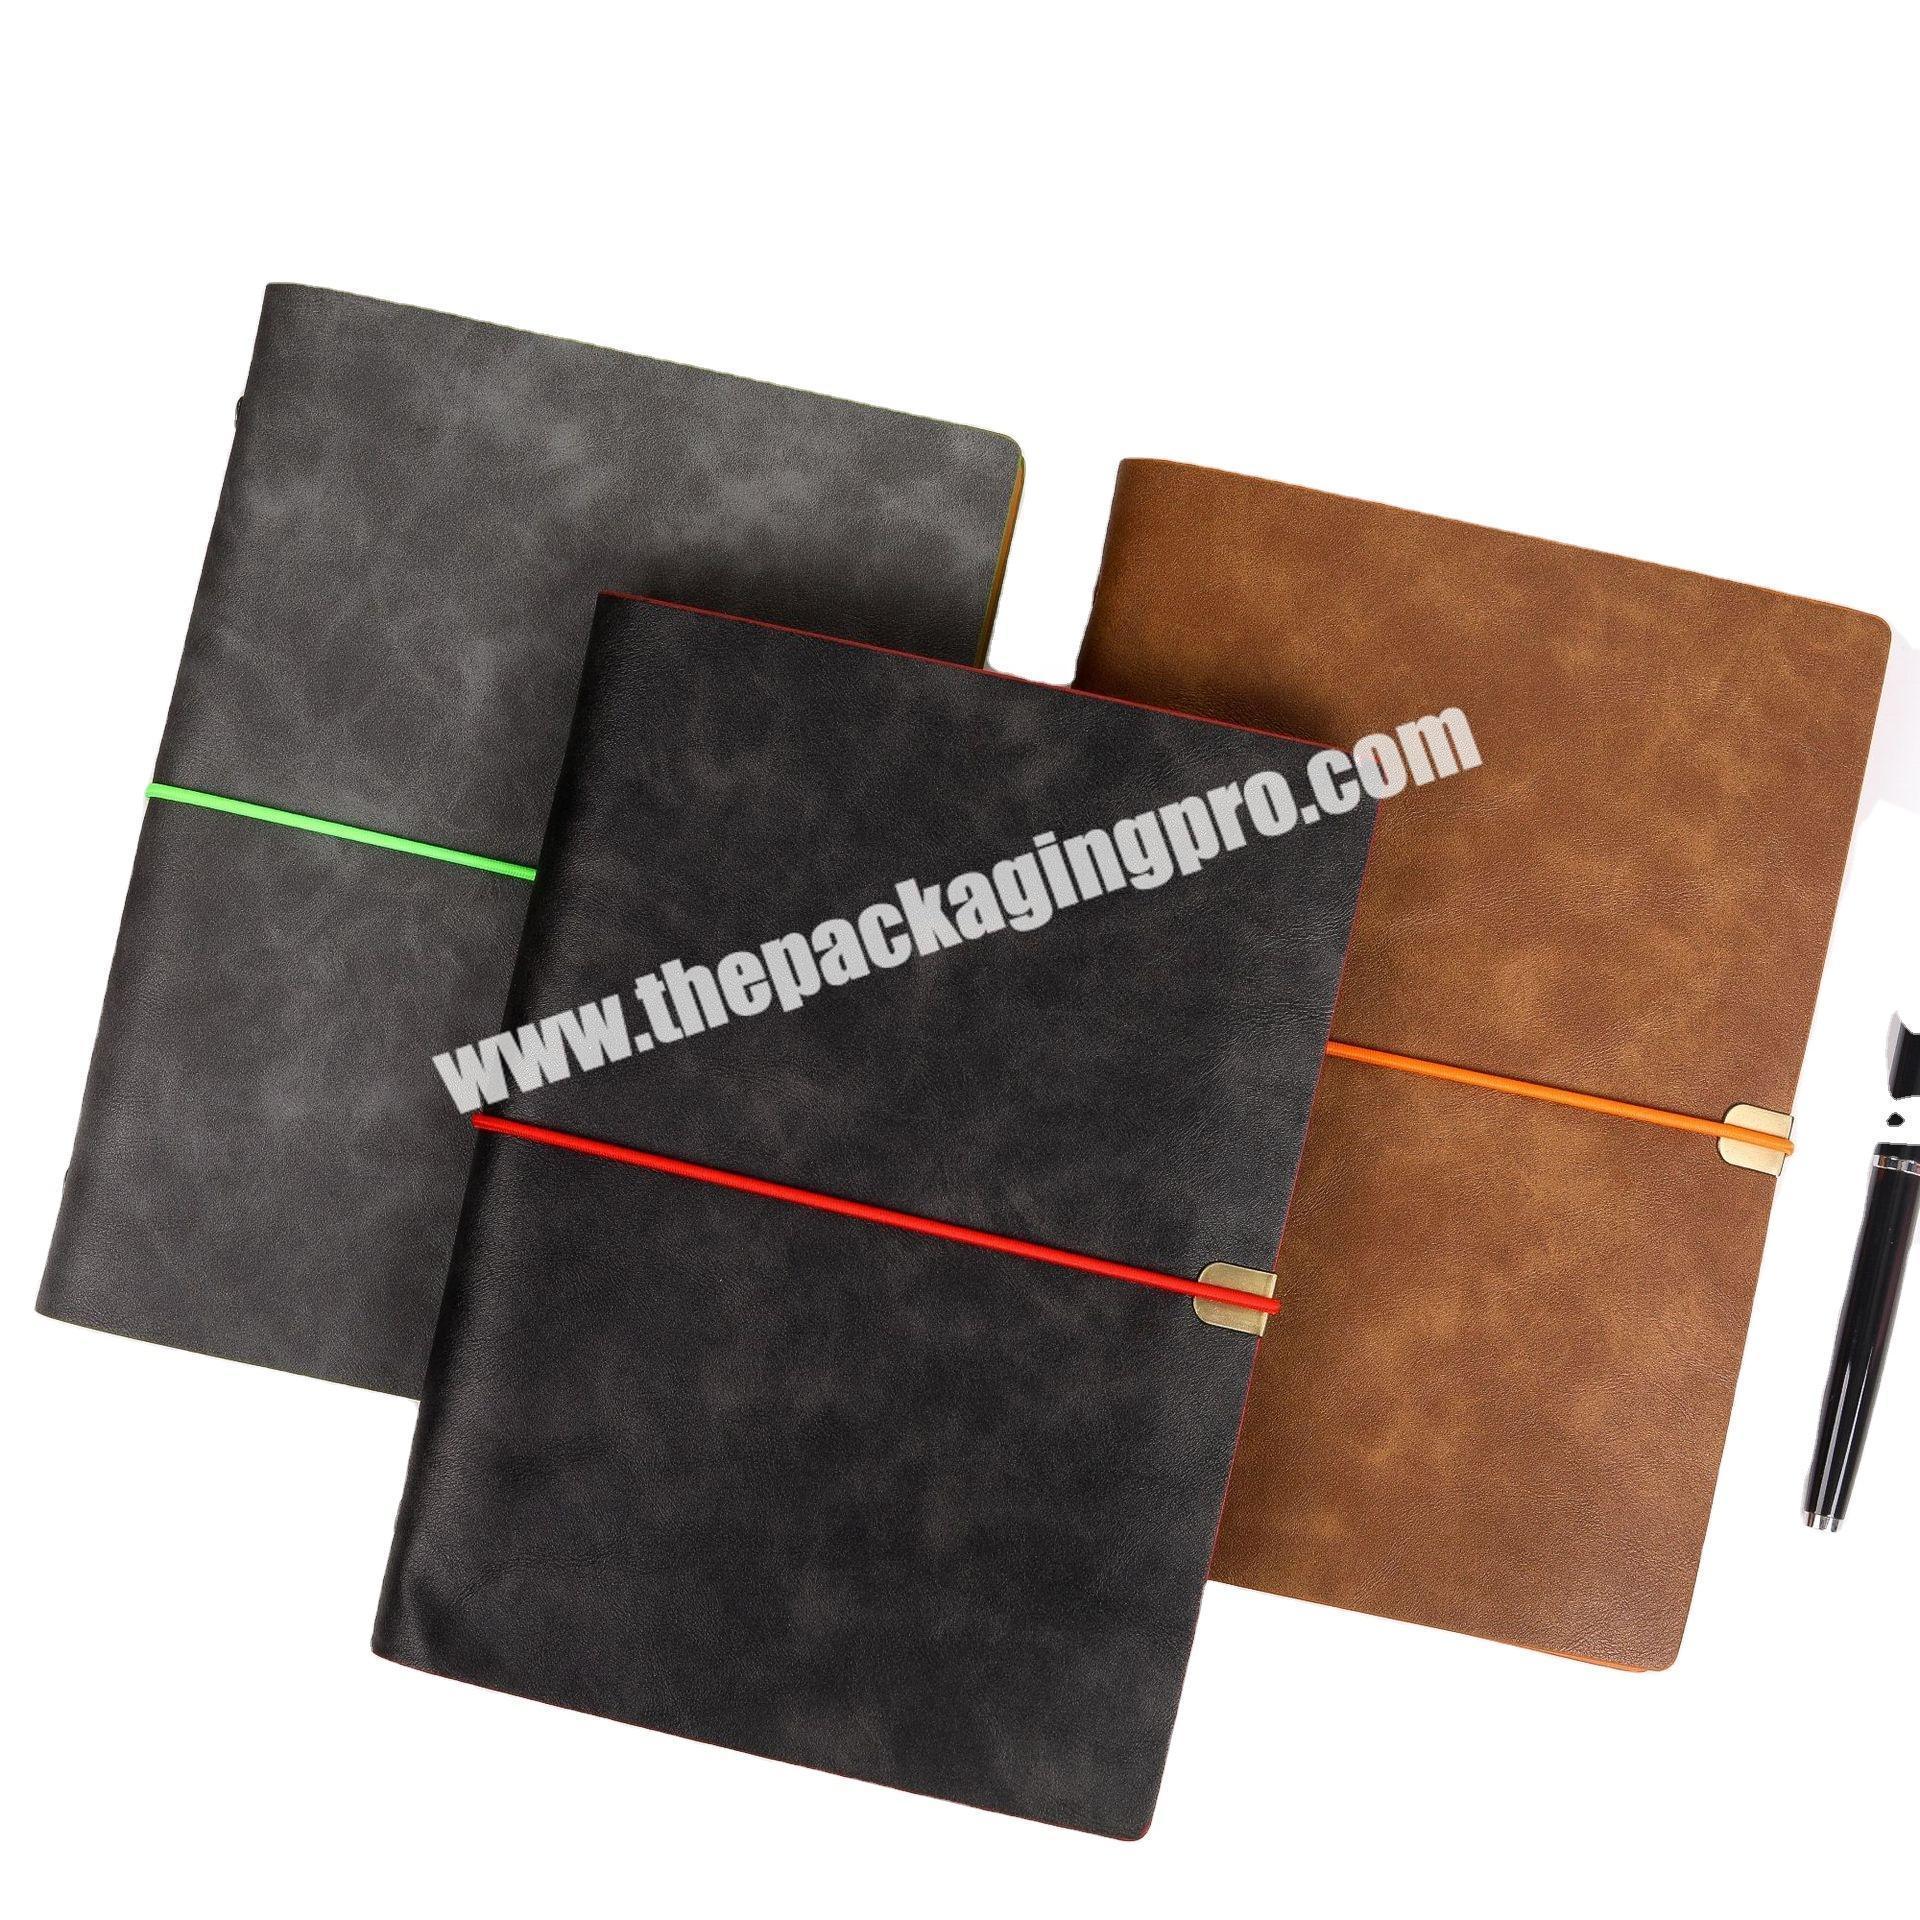 Custom A5 B5 Blank Genuine Leather Journal Diary 6 Ring Binder Power Bank Notebook Handmade Leather Vintage Travel Journals